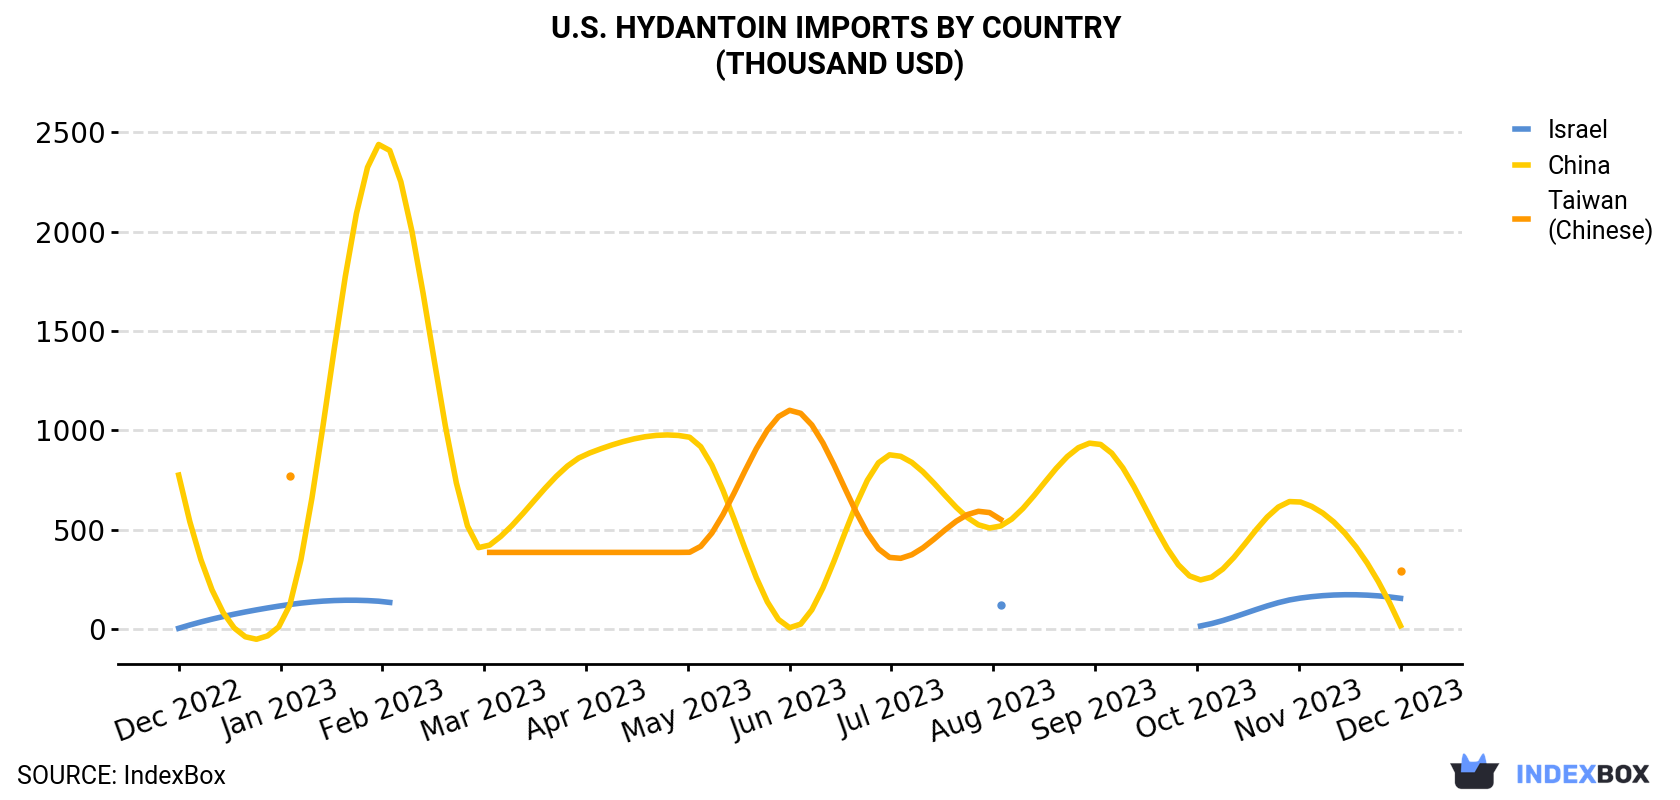 U.S. Hydantoin Imports By Country (Thousand USD)